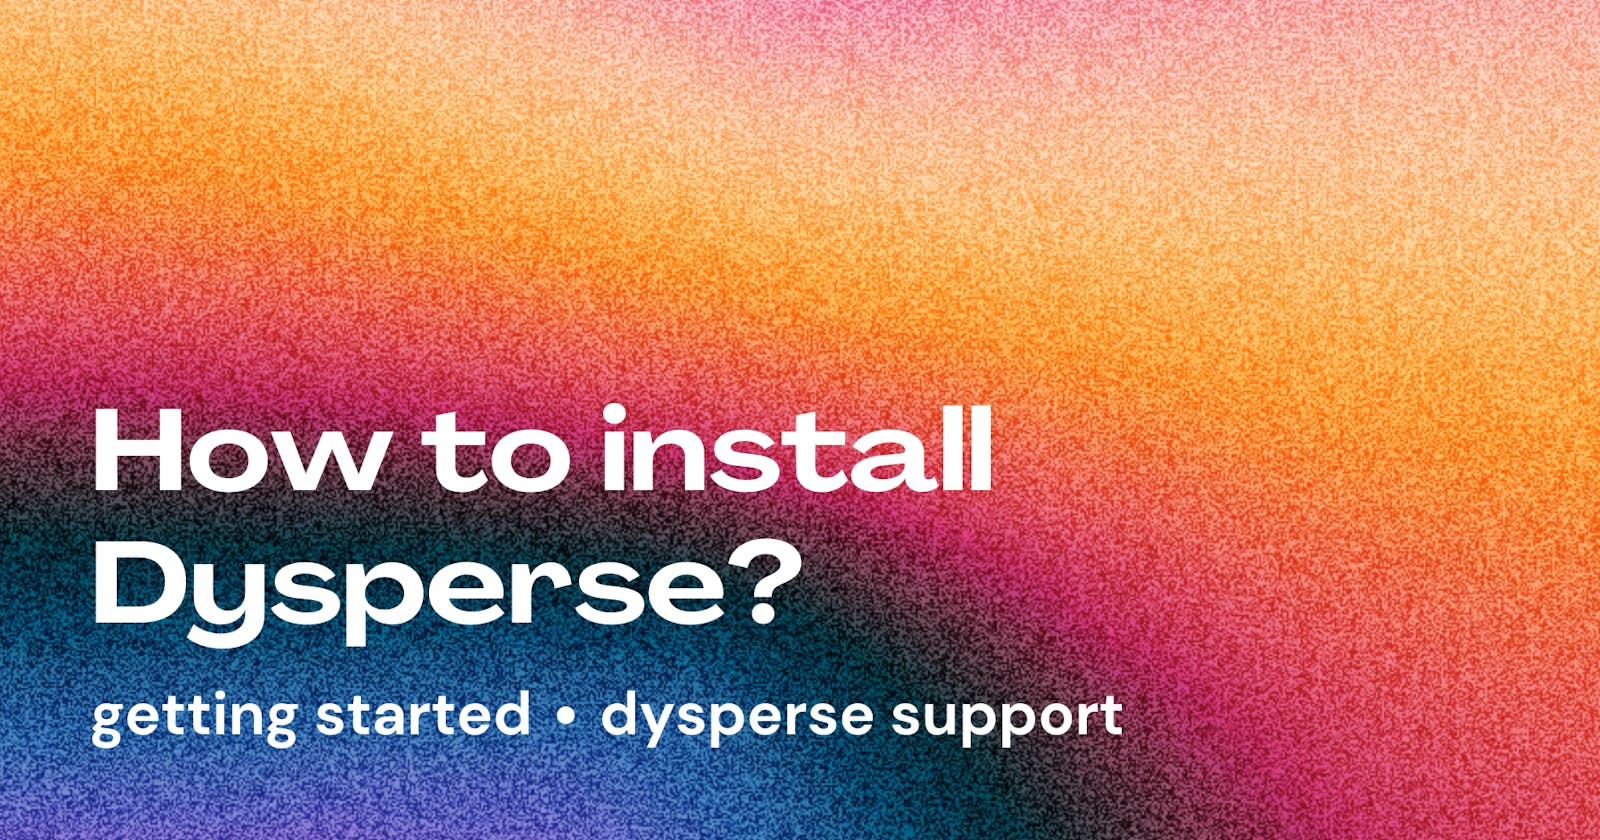 Installing Dysperse on your device